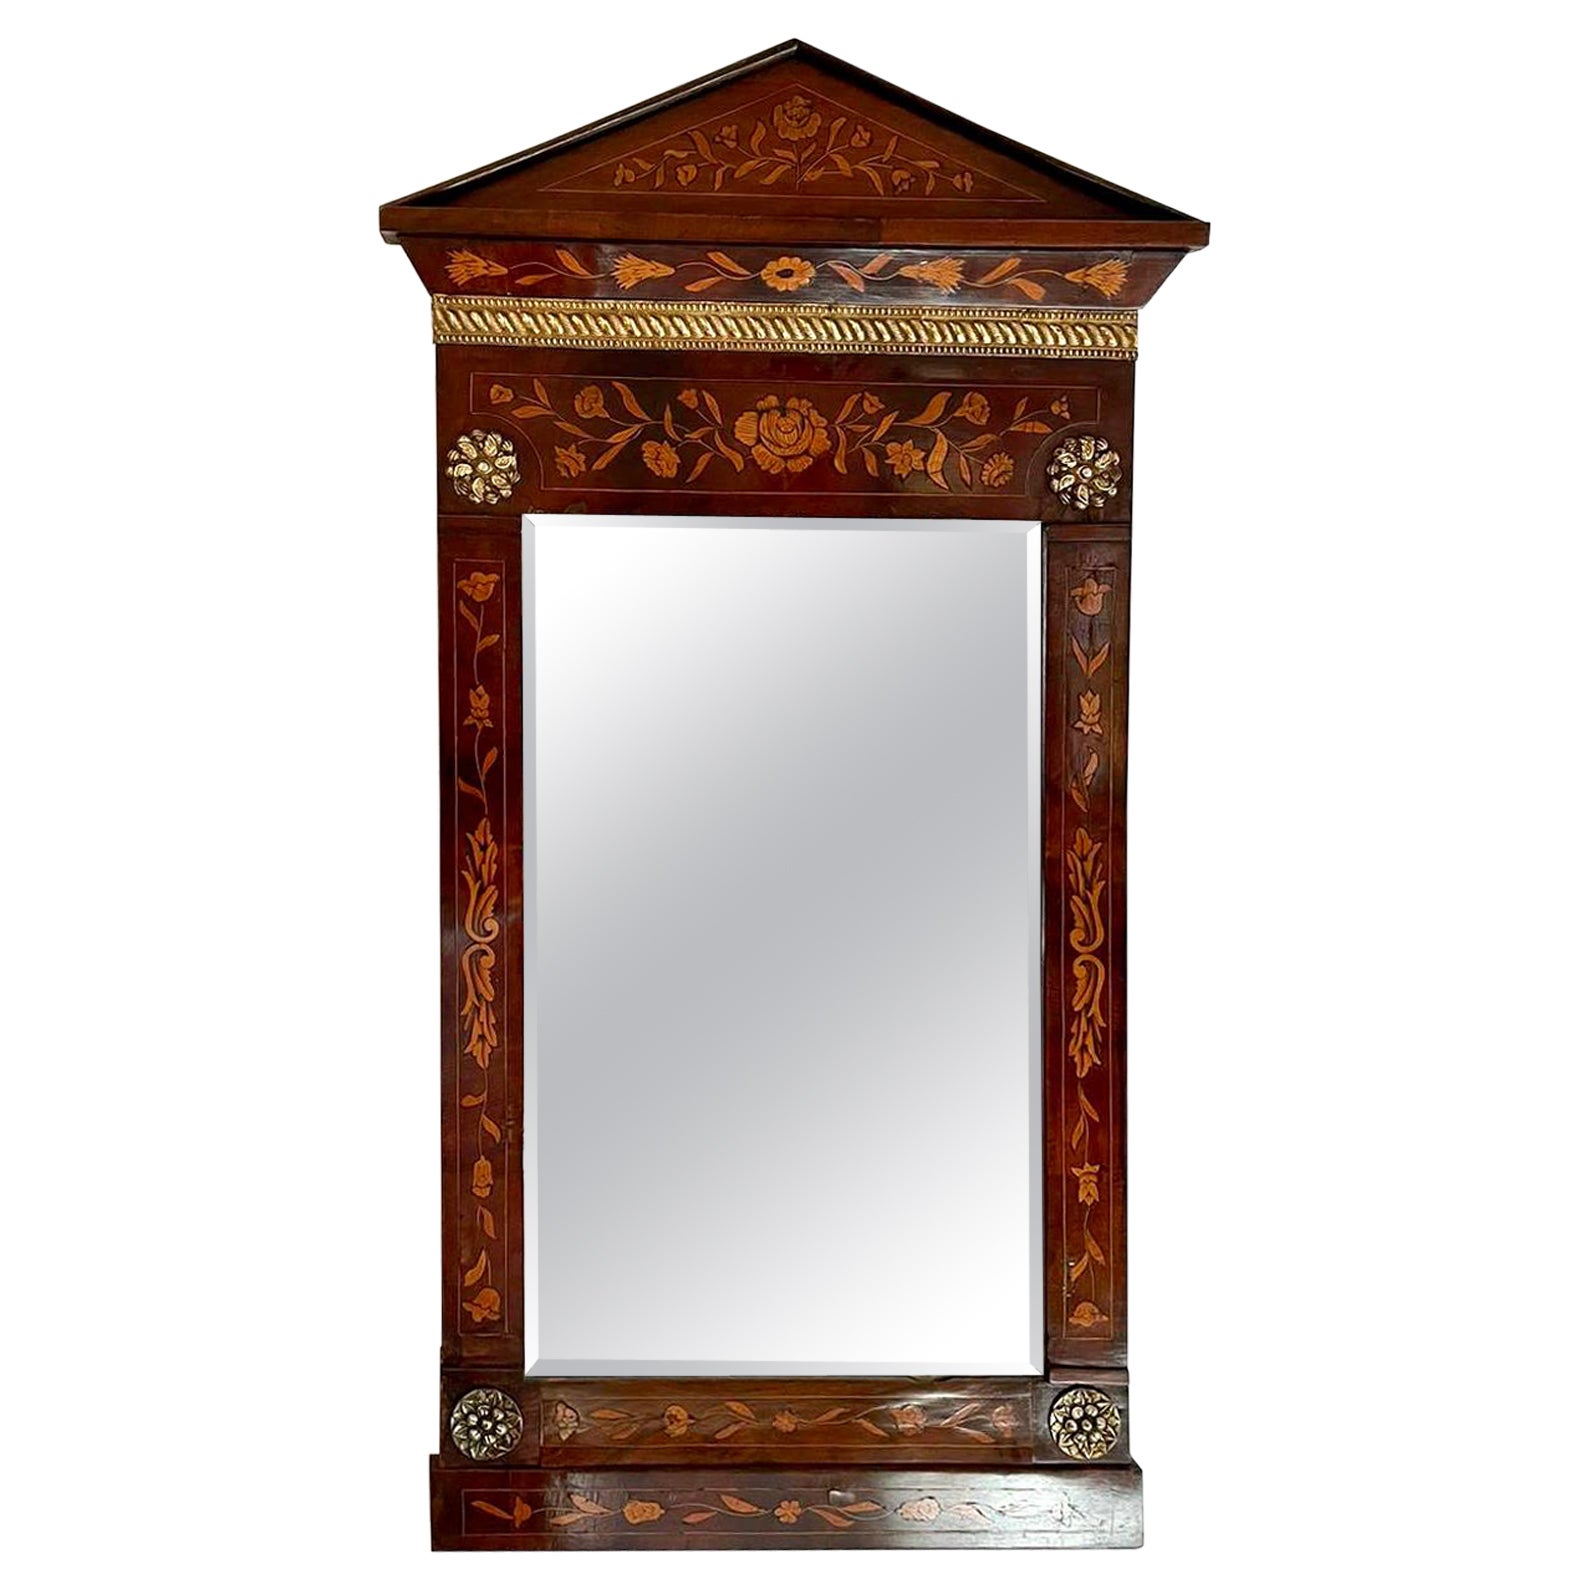 Outstanding Quality Antique Dutch Marquetry Mahogany Inlaid Wall Mirror For Sale